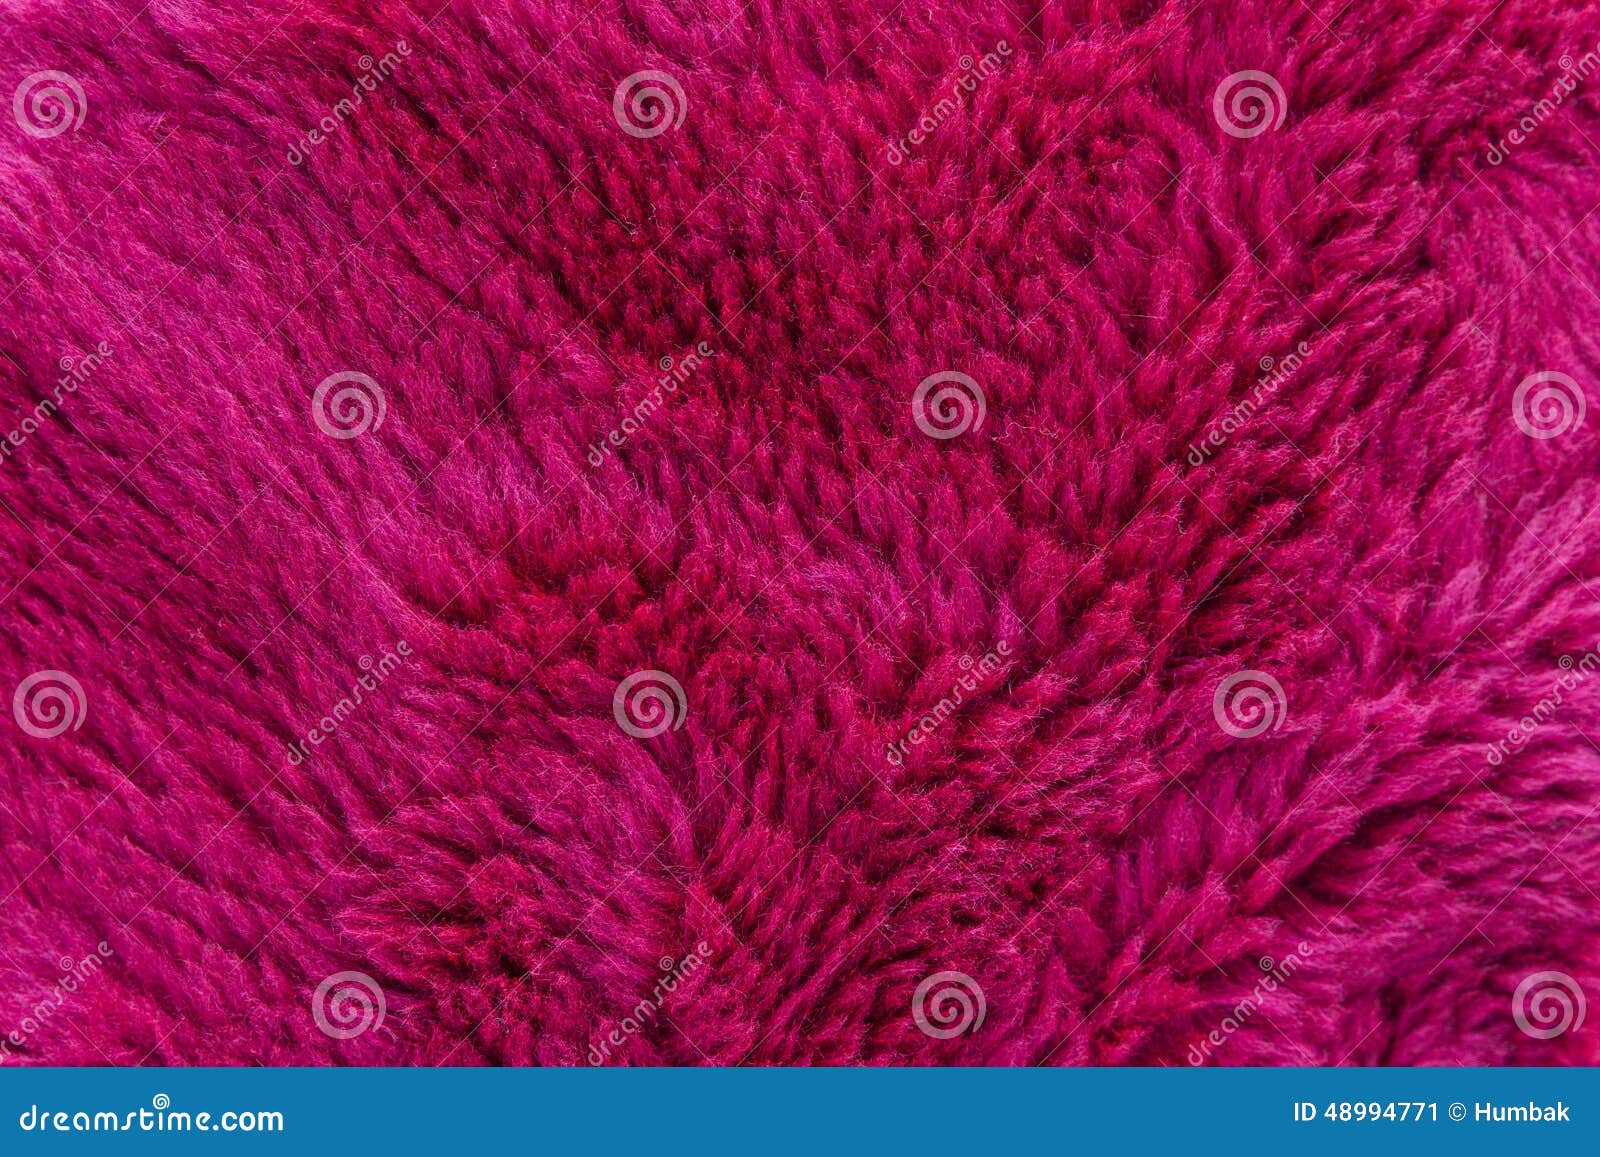 Furry fabric stock image. Image of texture, pink, fabric - 48994771